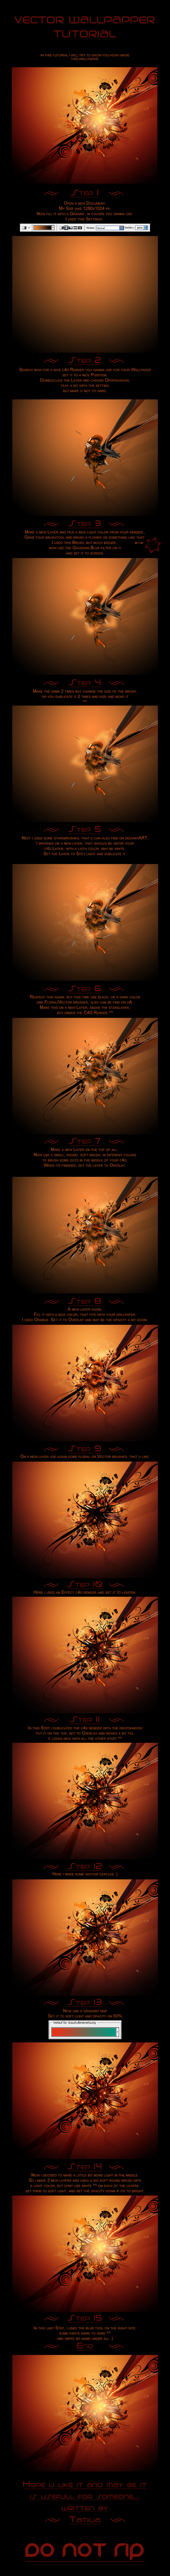 PHOTOSHOP Tutorial : Vector Wallpaper. « on: March 01, 2008, 03:09:23 PM »